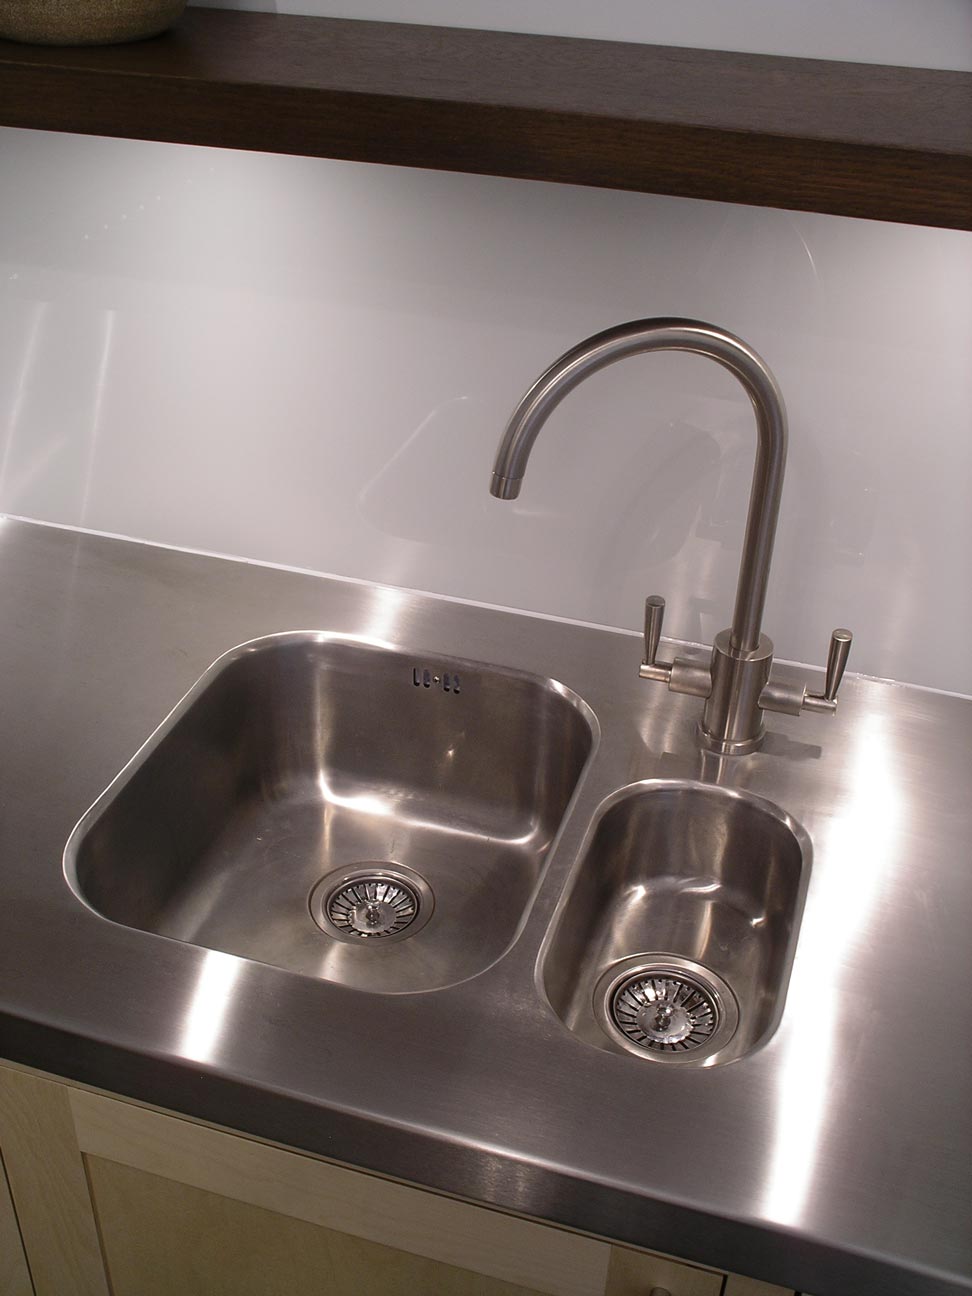 undermounted sinks is welded to the stainless steel worktop